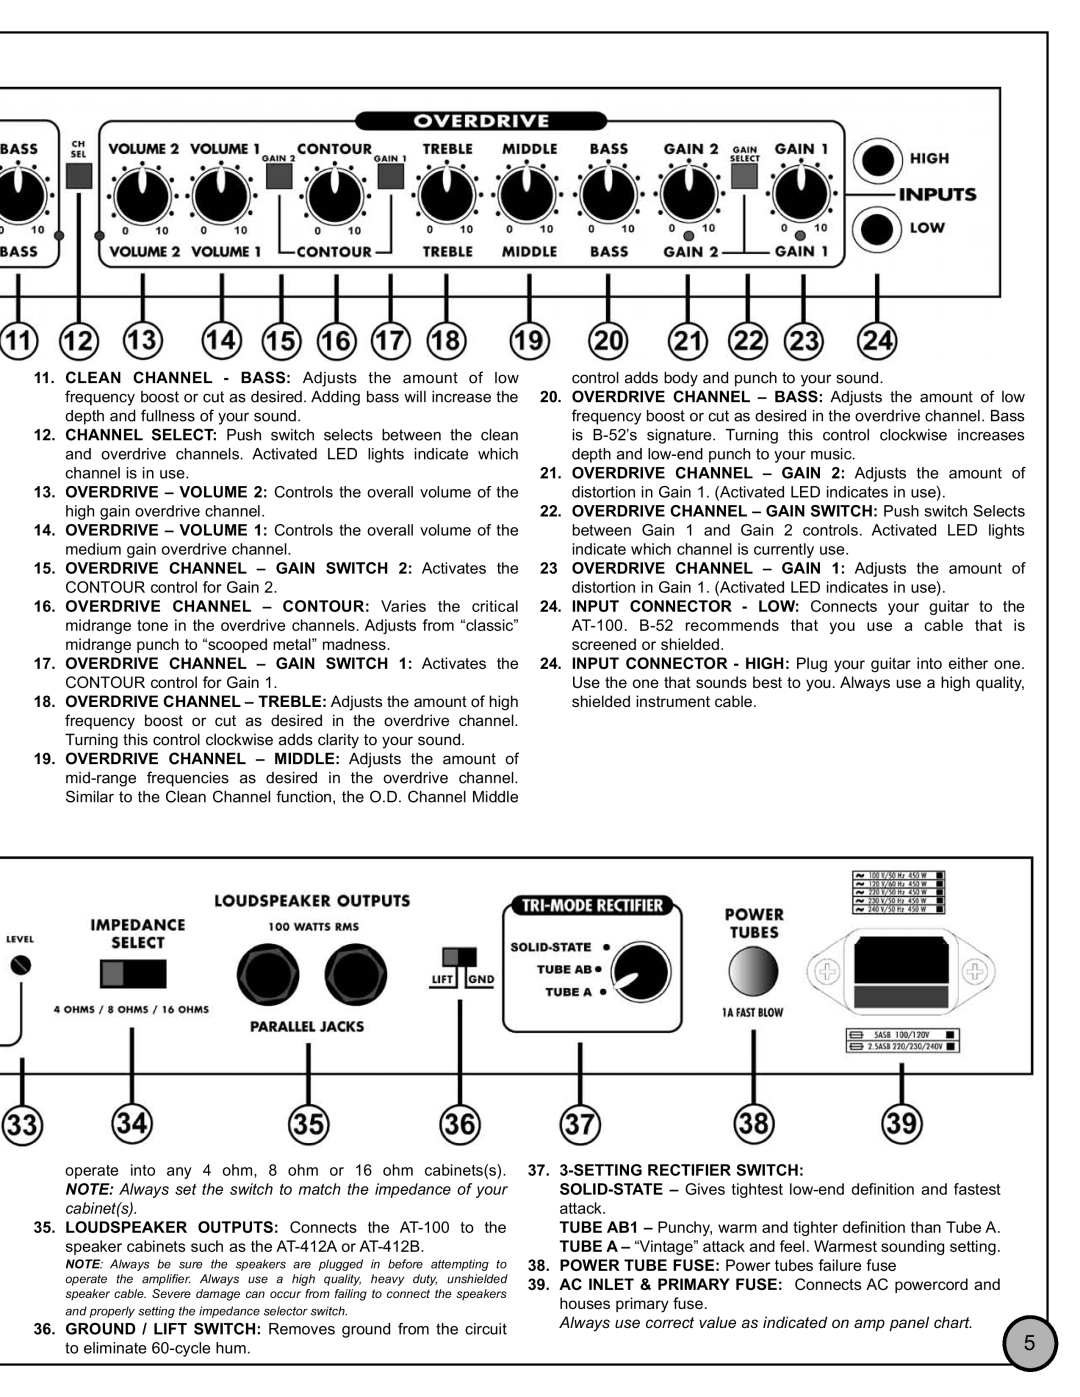 ETI Sound Systems, INC AT-100 specifications 37. 3-SETTINGRECTIFIER SWITCH 